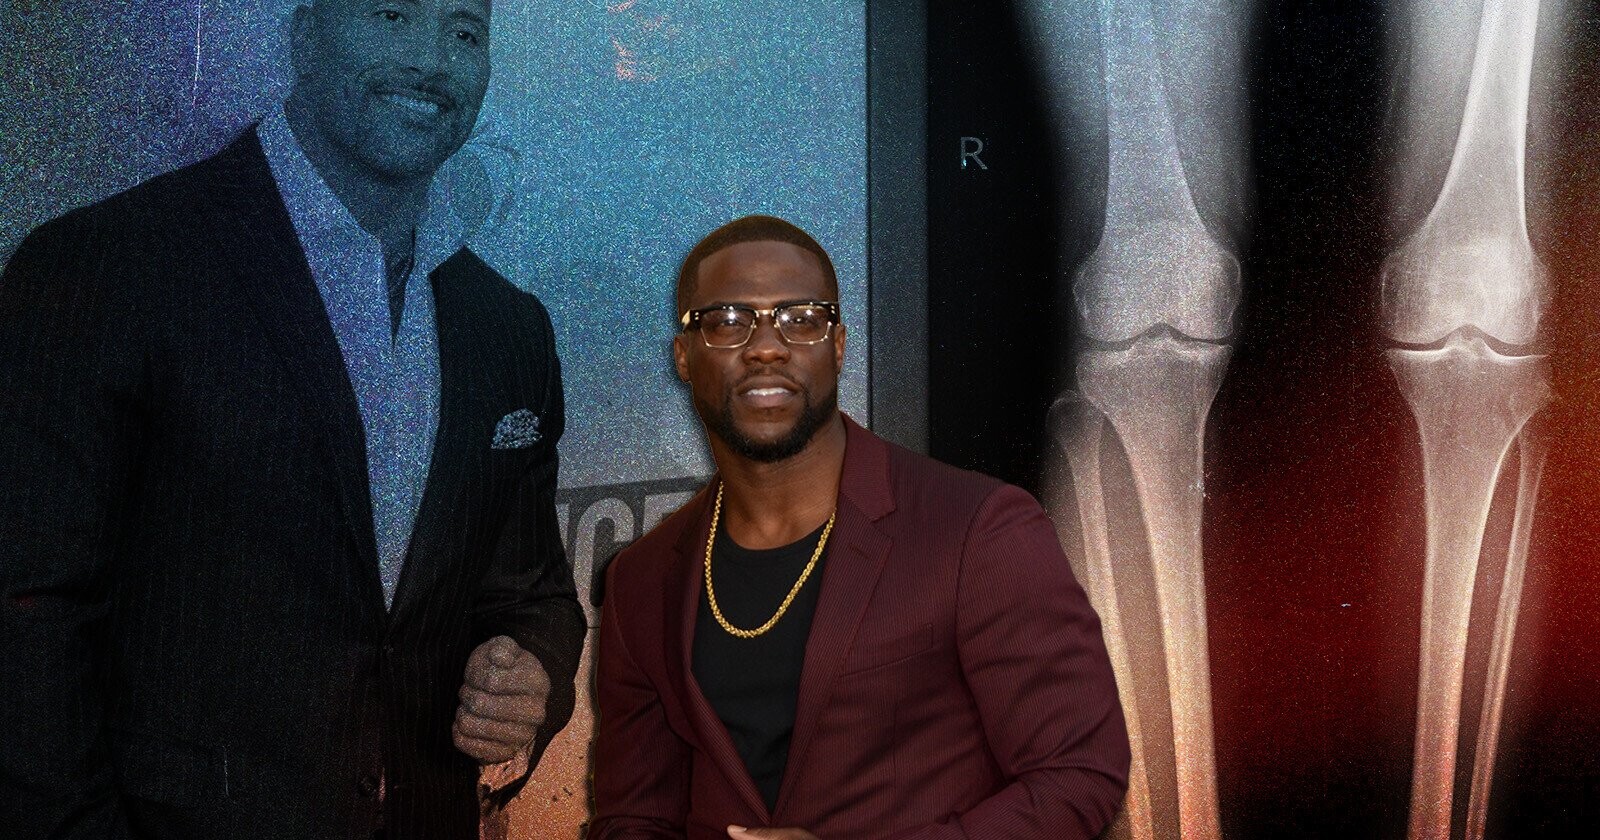 Height Challenged Kevin Hart Says ‘Hell No!’ to Leg-Lengthening Surgery ...